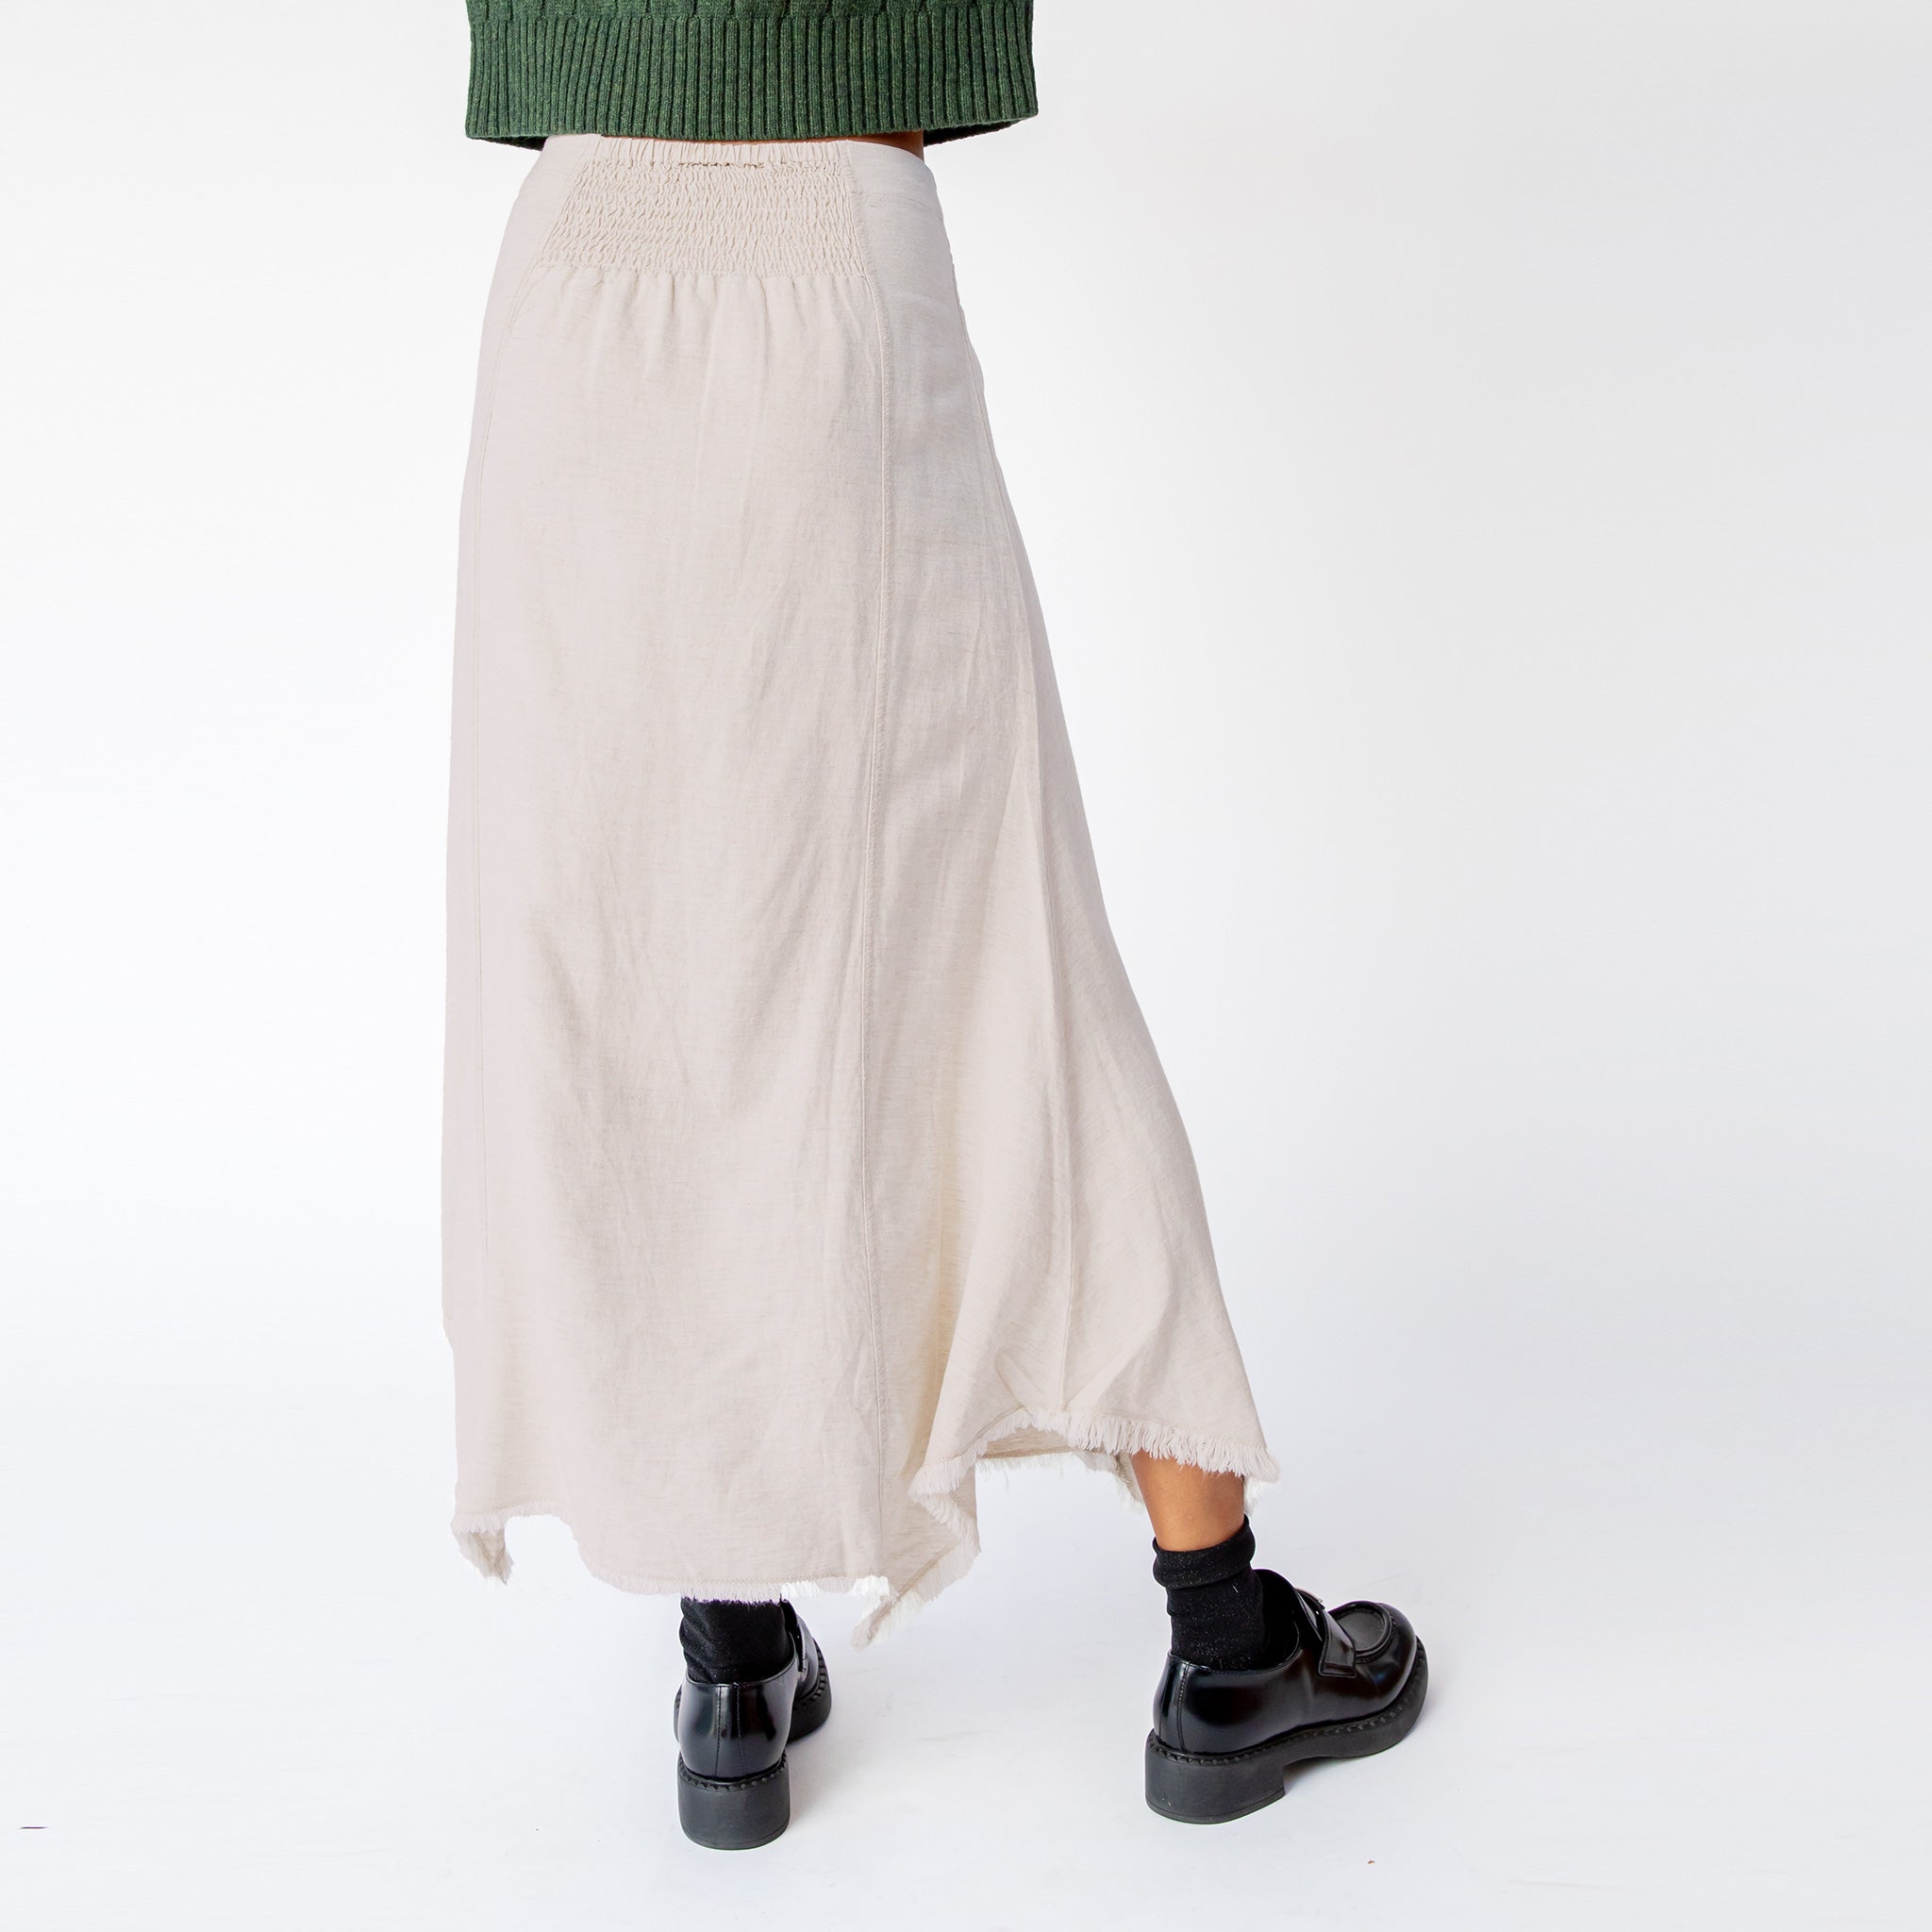 A model wears Misc Etc's smocked linen midi skirt in sand, featuring a smocked elastic waistband with drawstring and an asymmetrical hem, paired here with a green cable knit sweater and black loafers - back view.